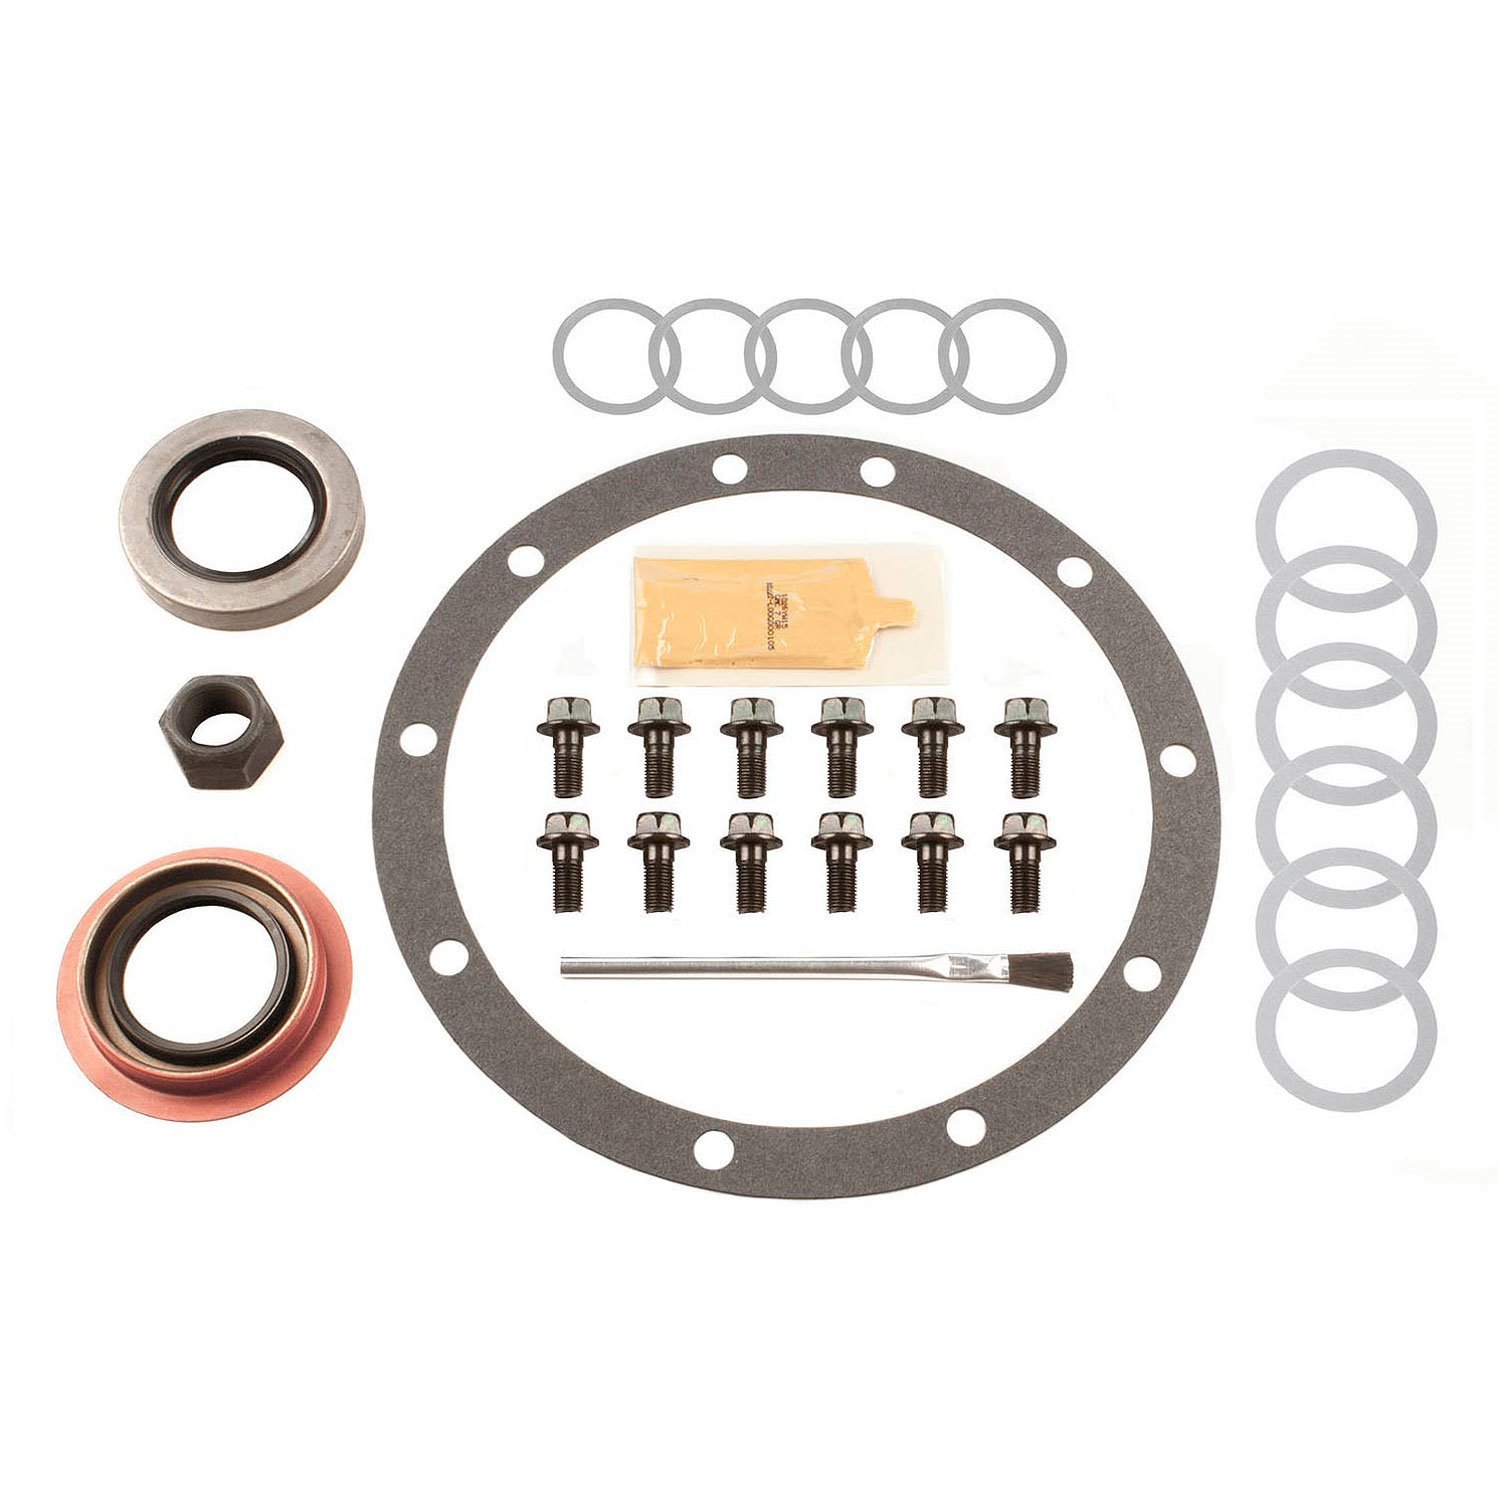 Ring And Pinion Installation Kit; 742 Housing; Incl. Pinion-Carrier Shims/Pinion Nut/Ring Gear Bolts